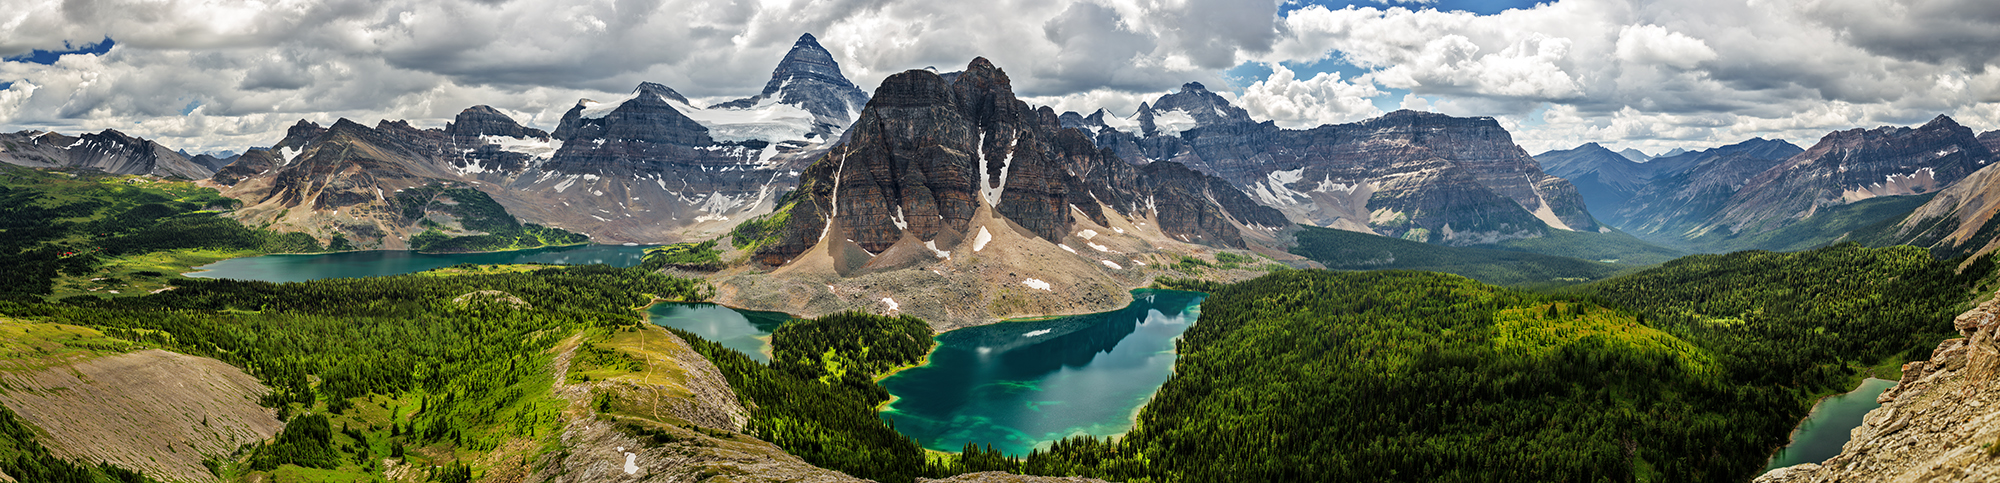 Ultra-High-Resolution-Panoramic-Image-Assiniboine-Provincial-Park-Daytime-BC-Canada